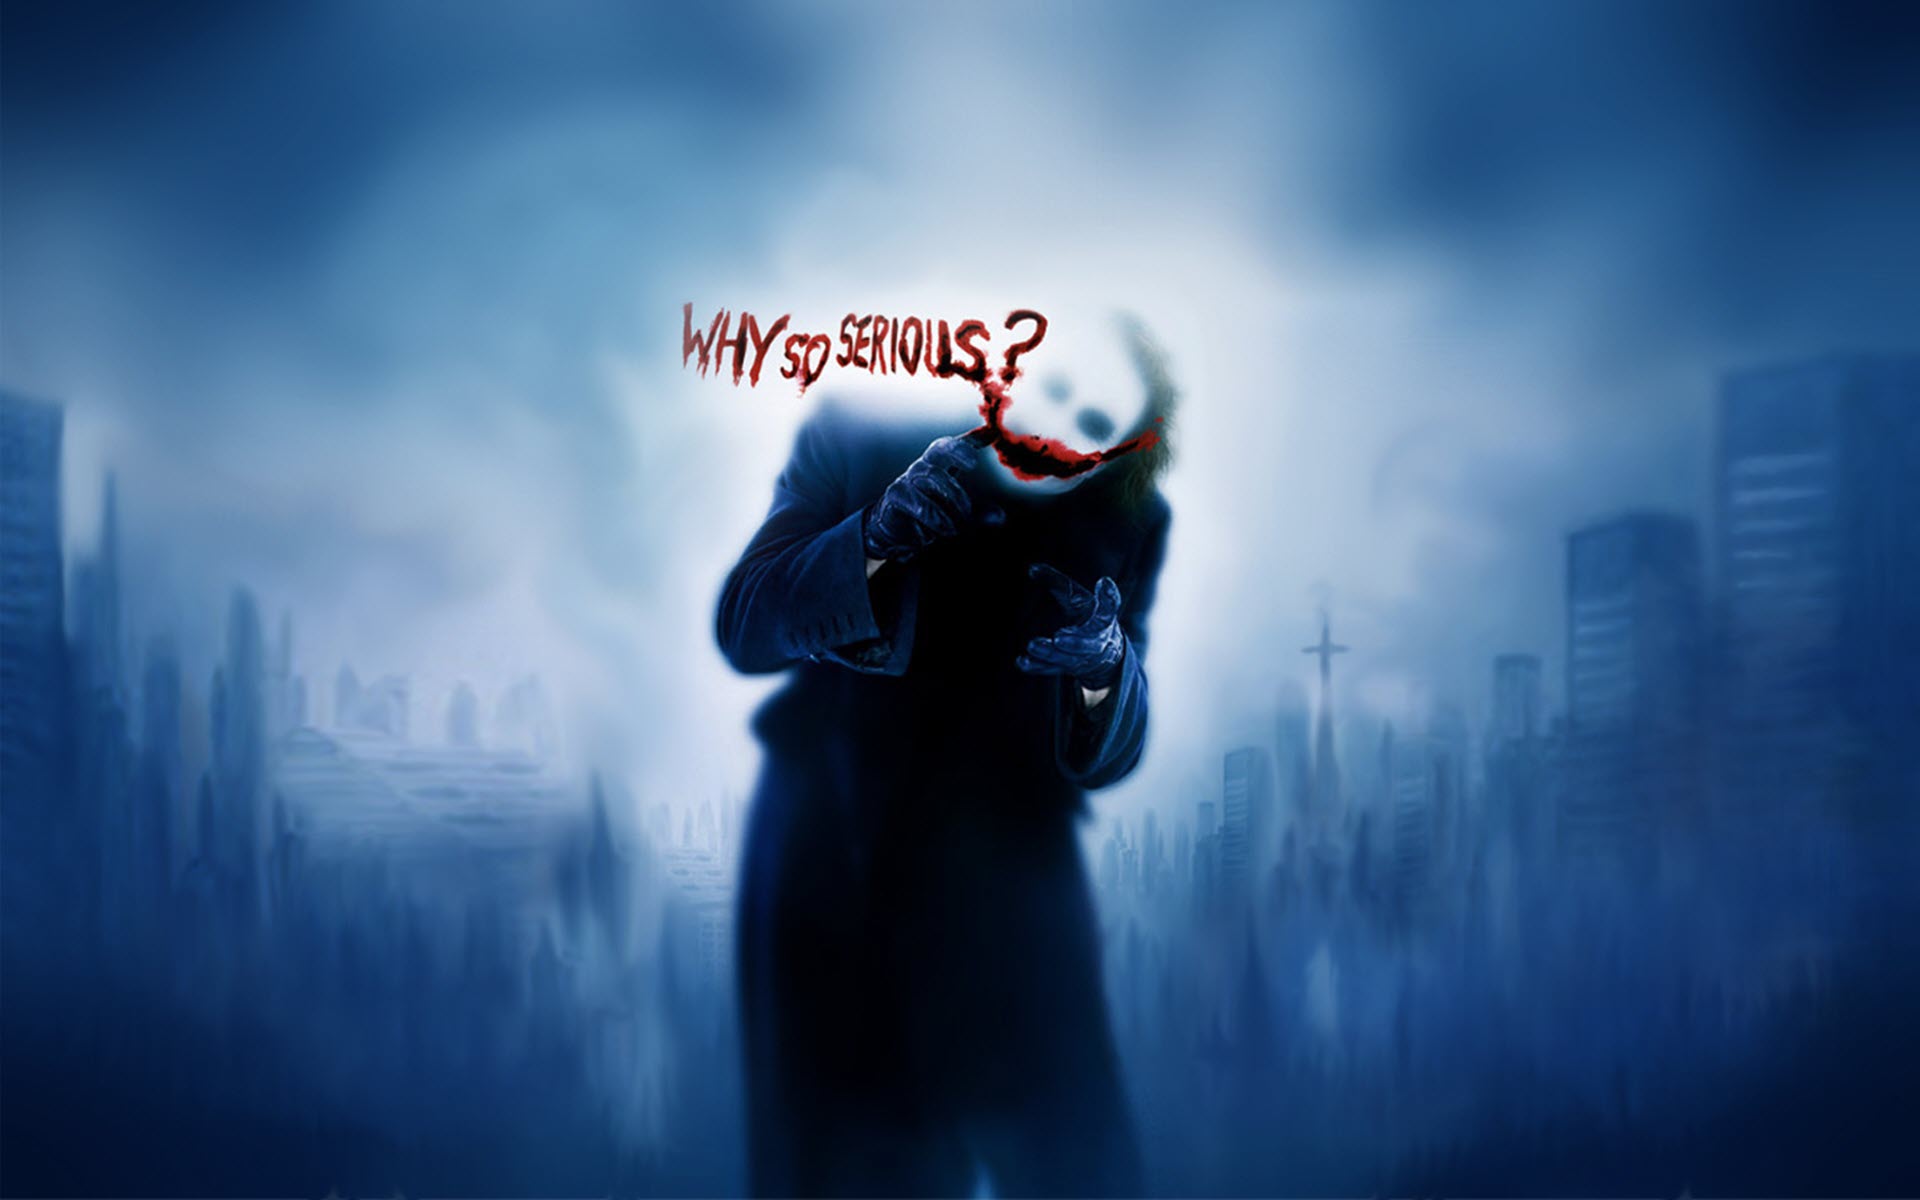 Why so serious wallpaper